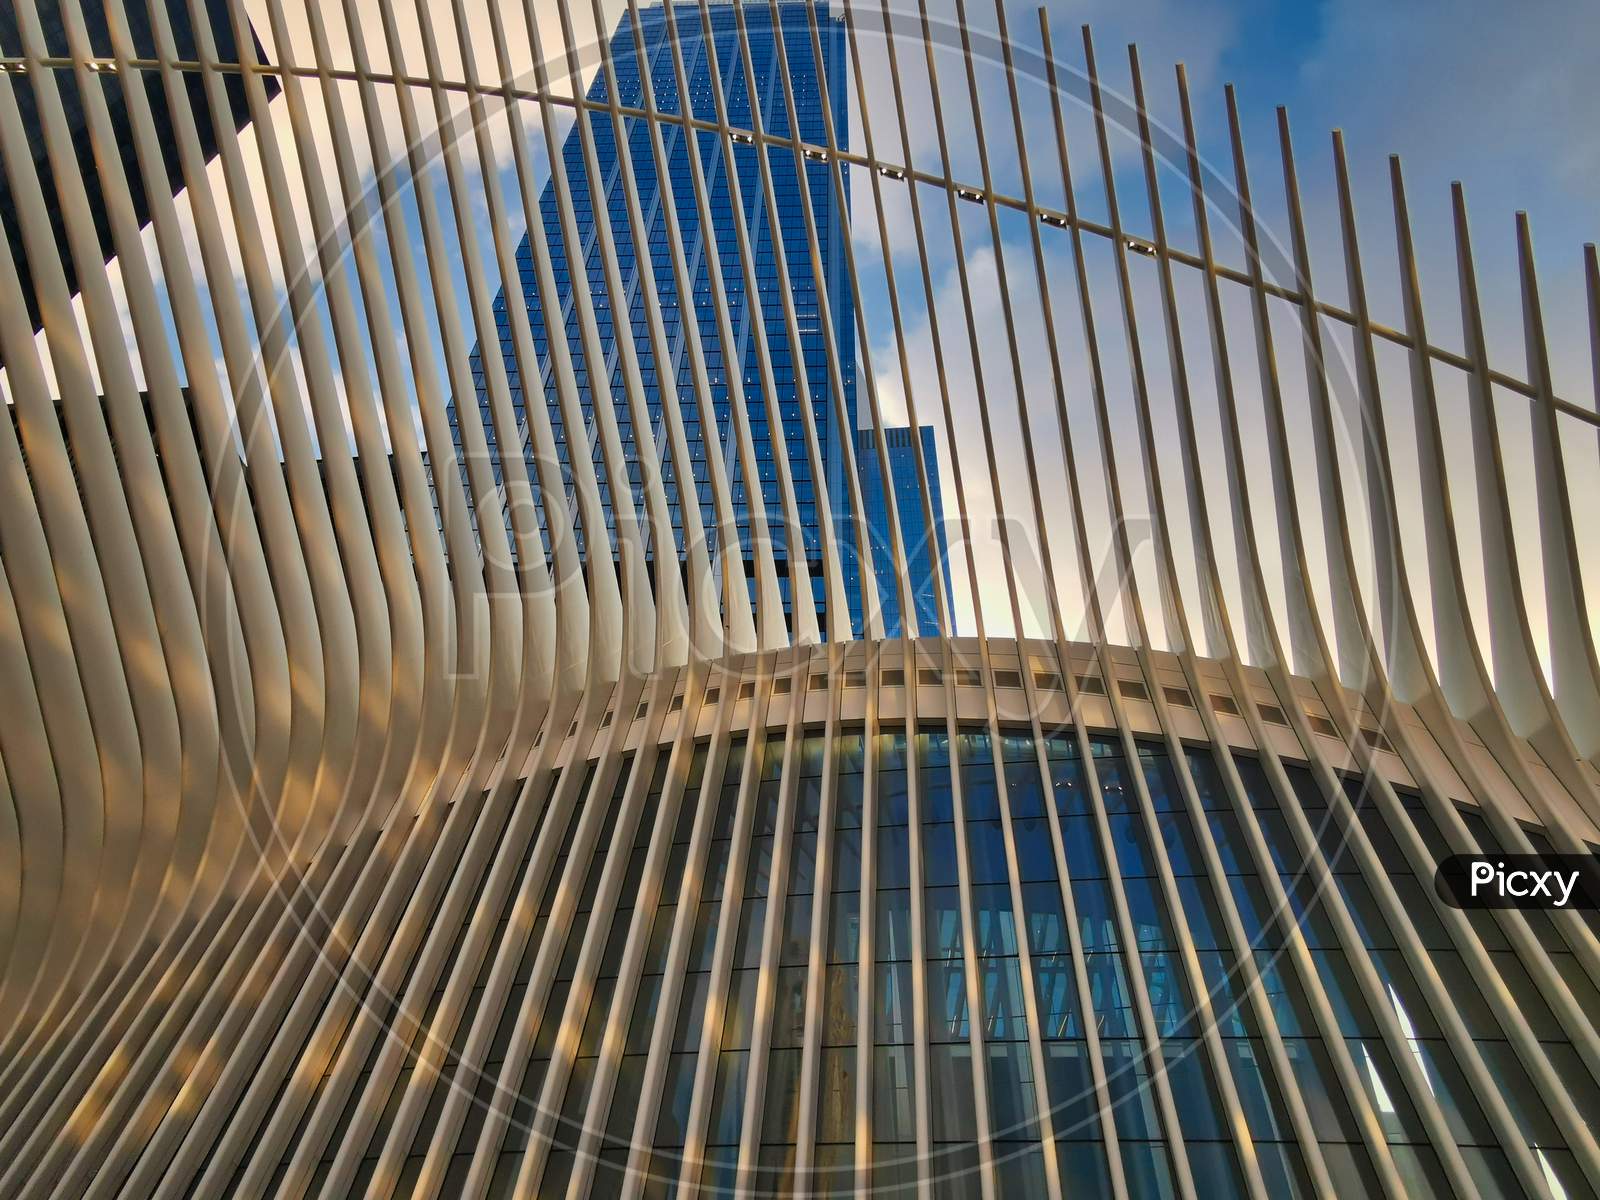 World Trade Center Transportation Hub ( Oculus)  in  New York city Financial District day light  exterior low angle close up view